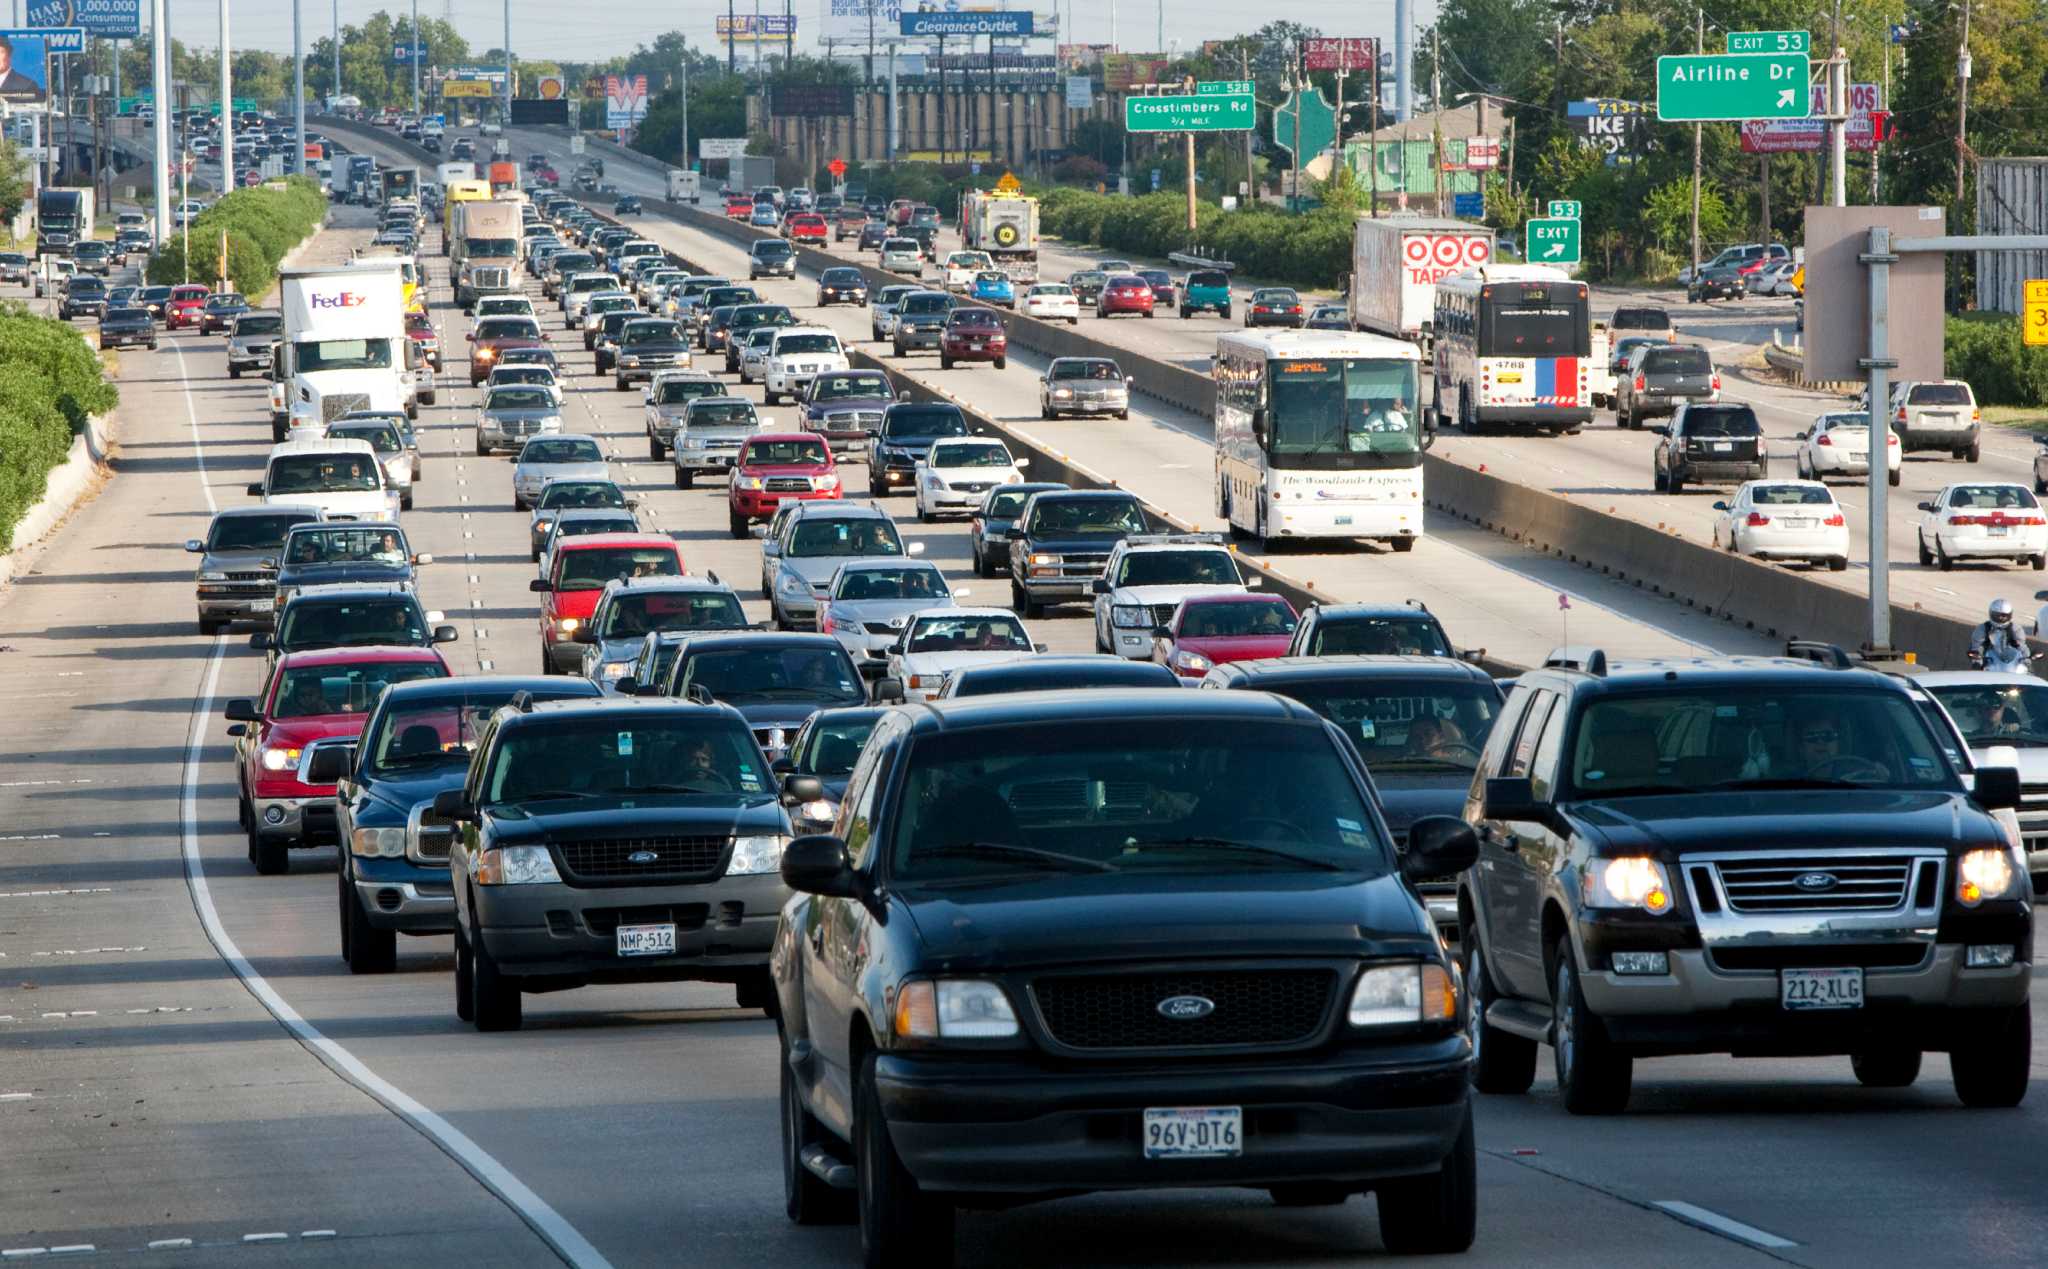 The Woodlands growth drives delays on road - Houston Chronicle2048 x 1269